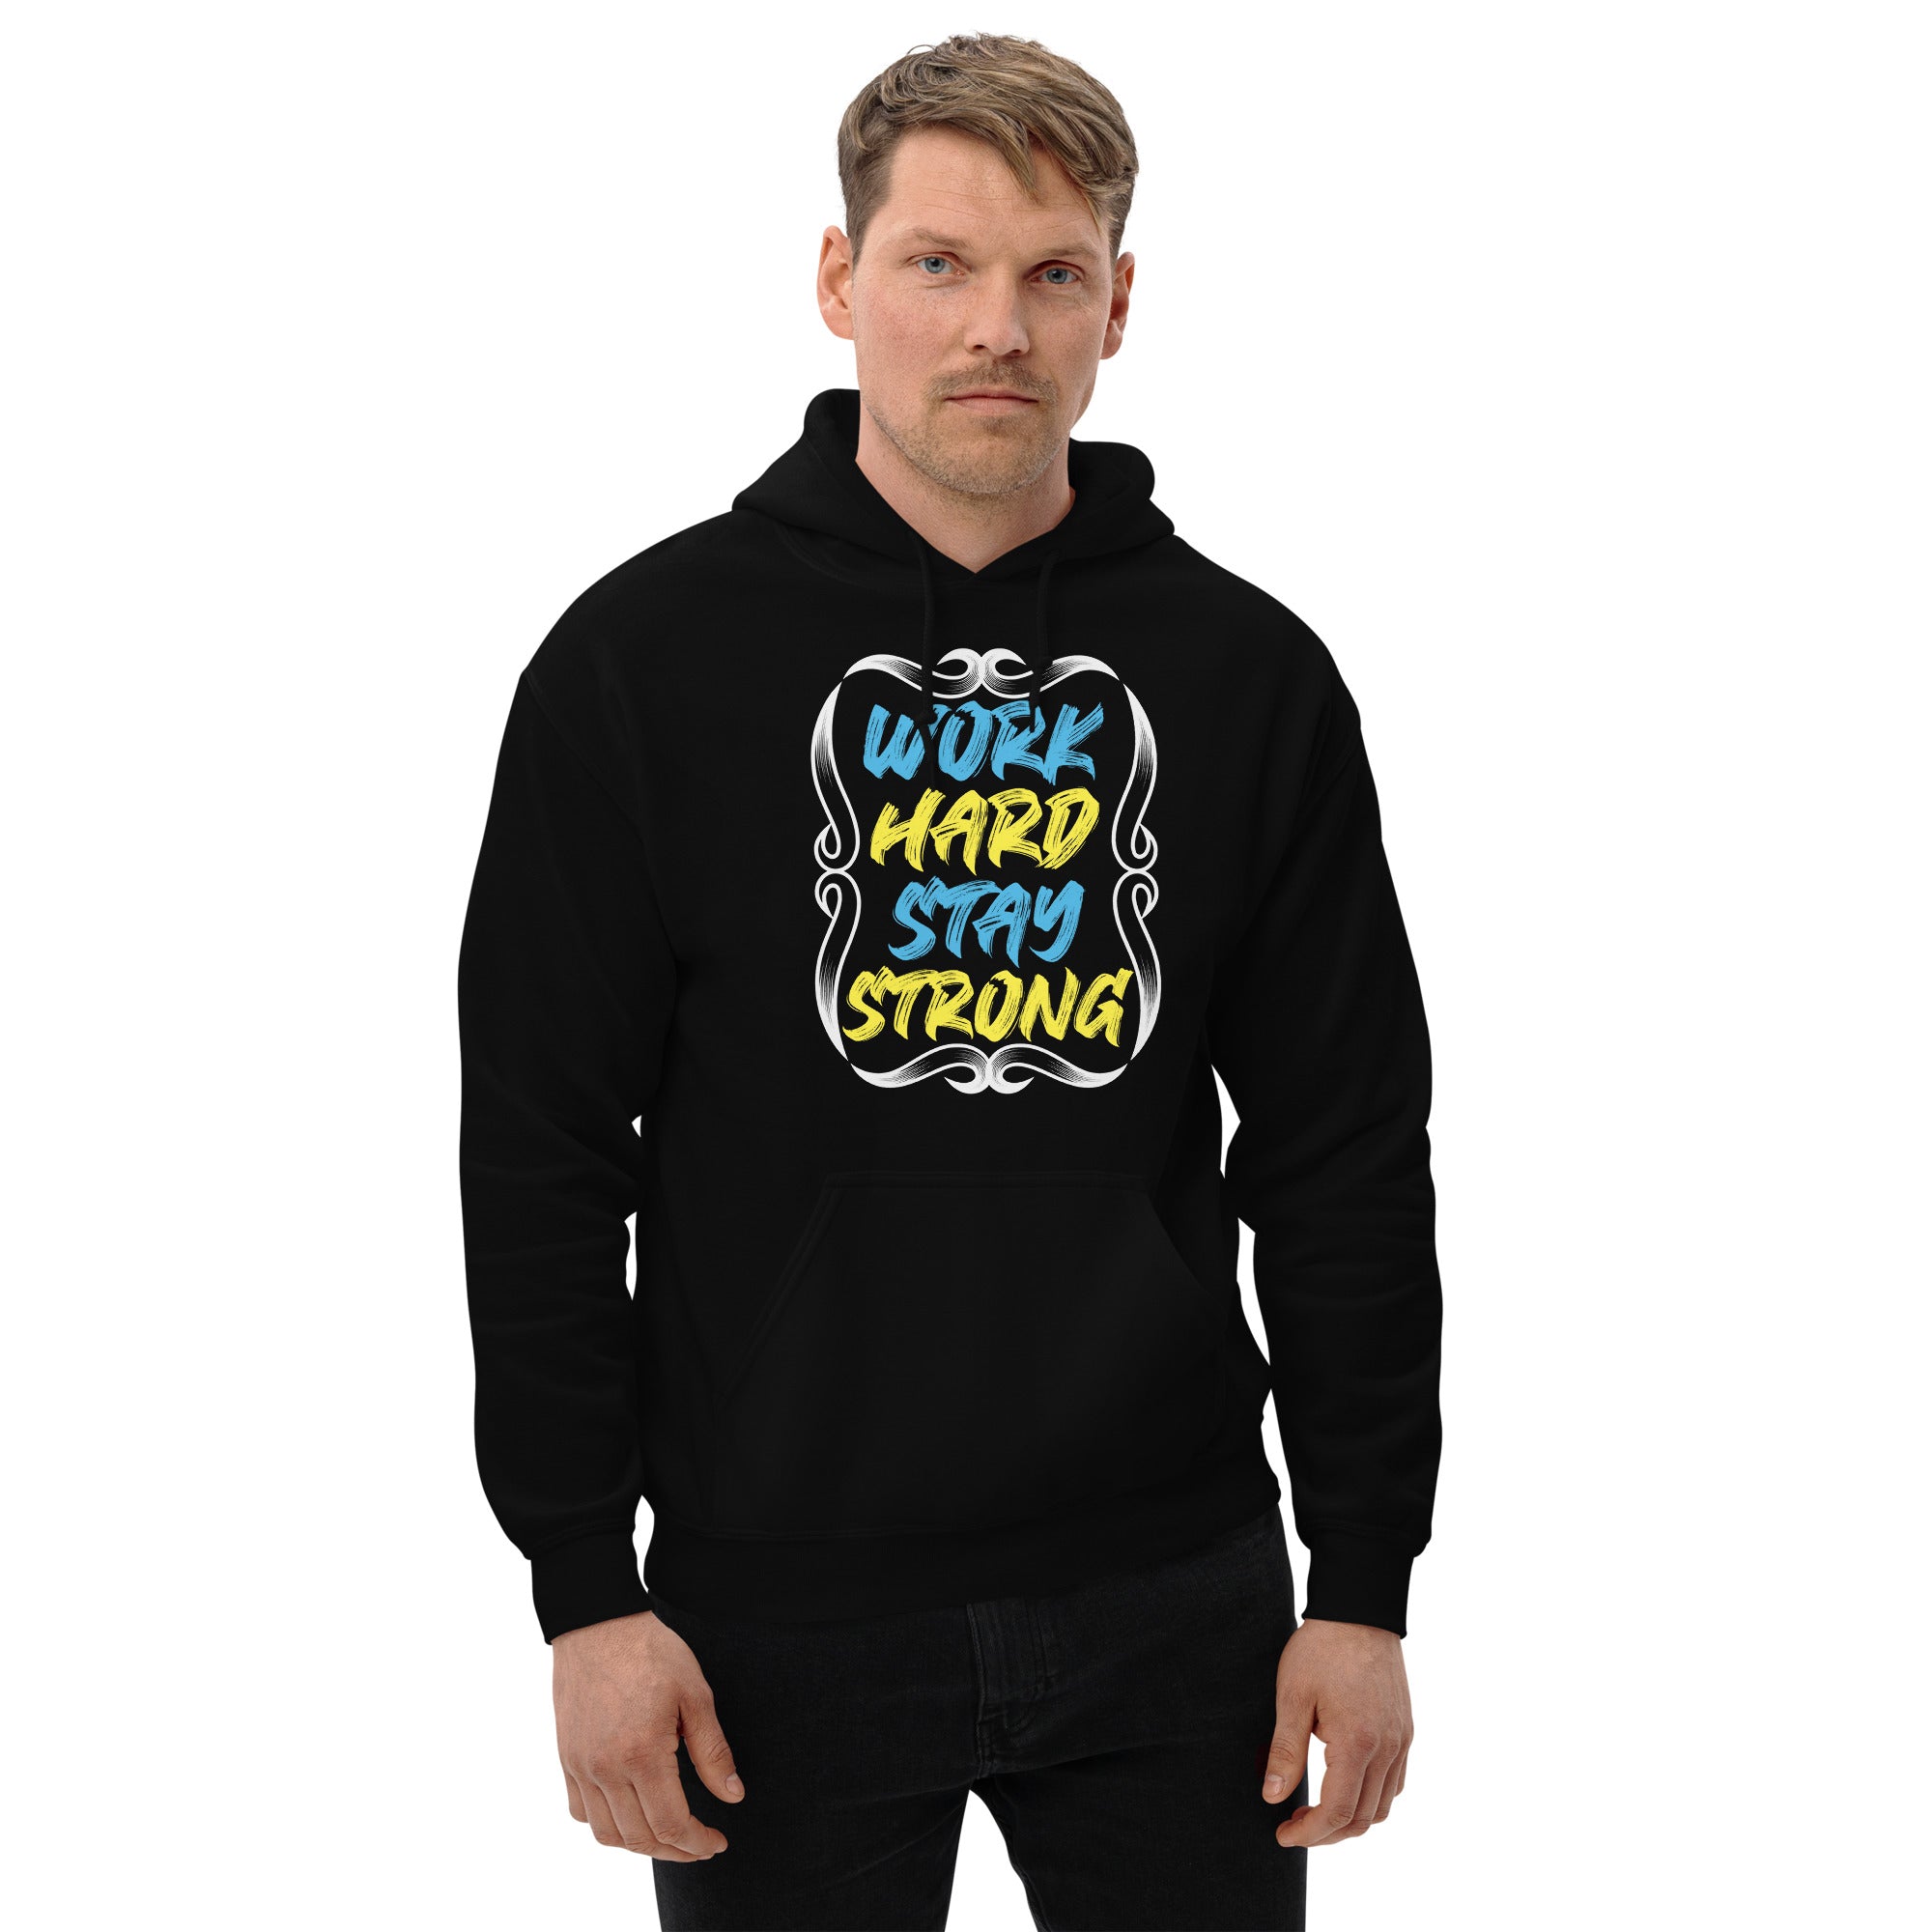 Work Hard, Stay Strong - Unisex Hoodie